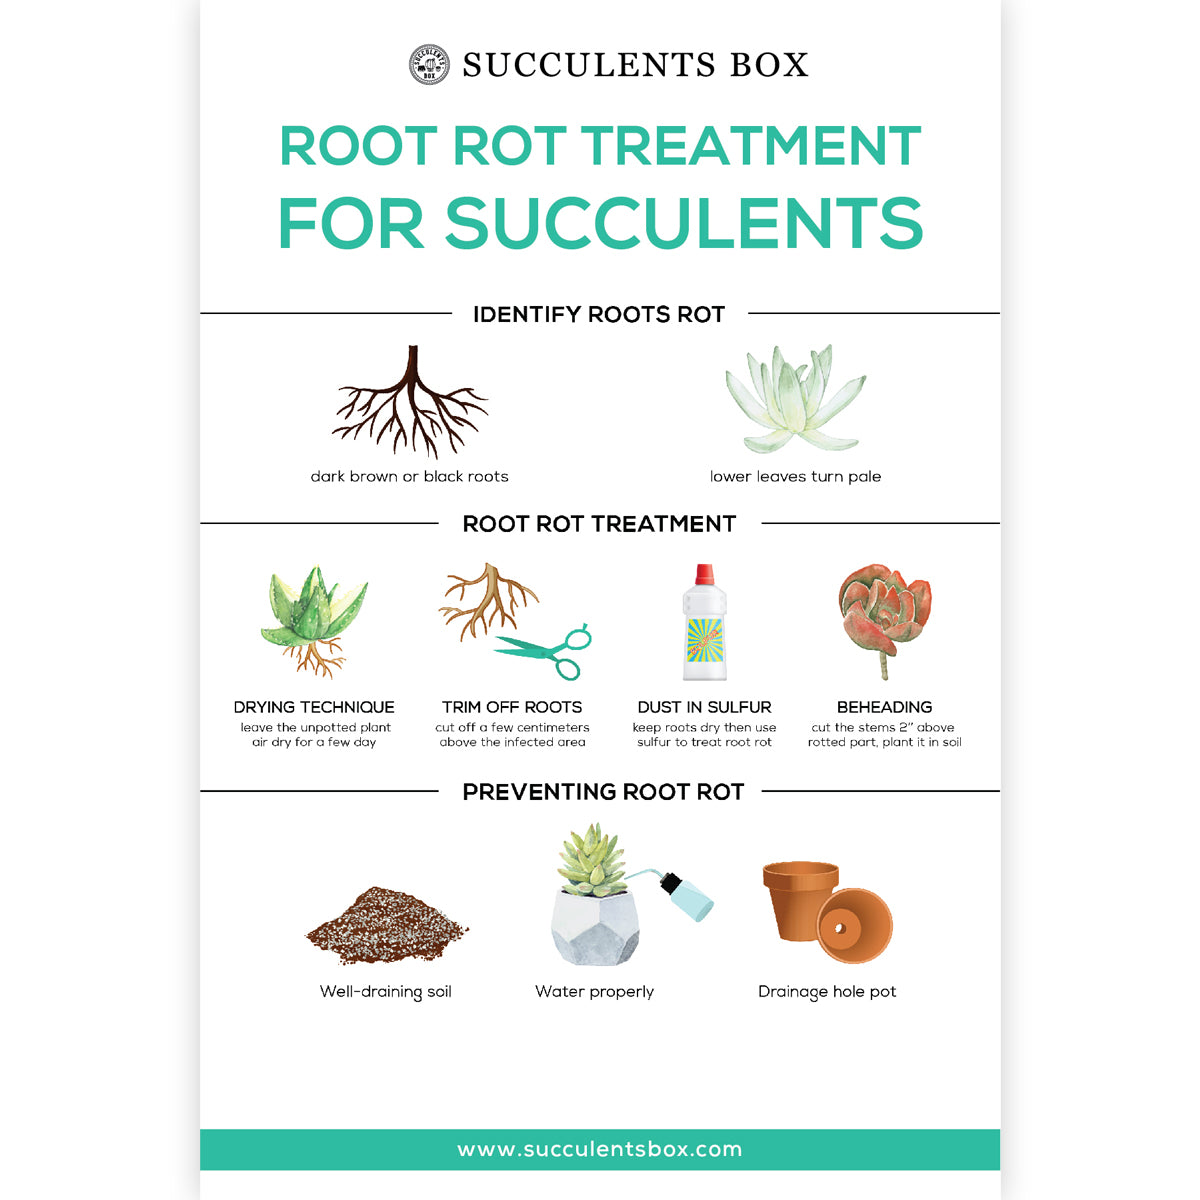 Root Rot Treatment for Succulents care card for sale, Succulent care instruction, Succulent gift ideas, gifts for succulent lovers